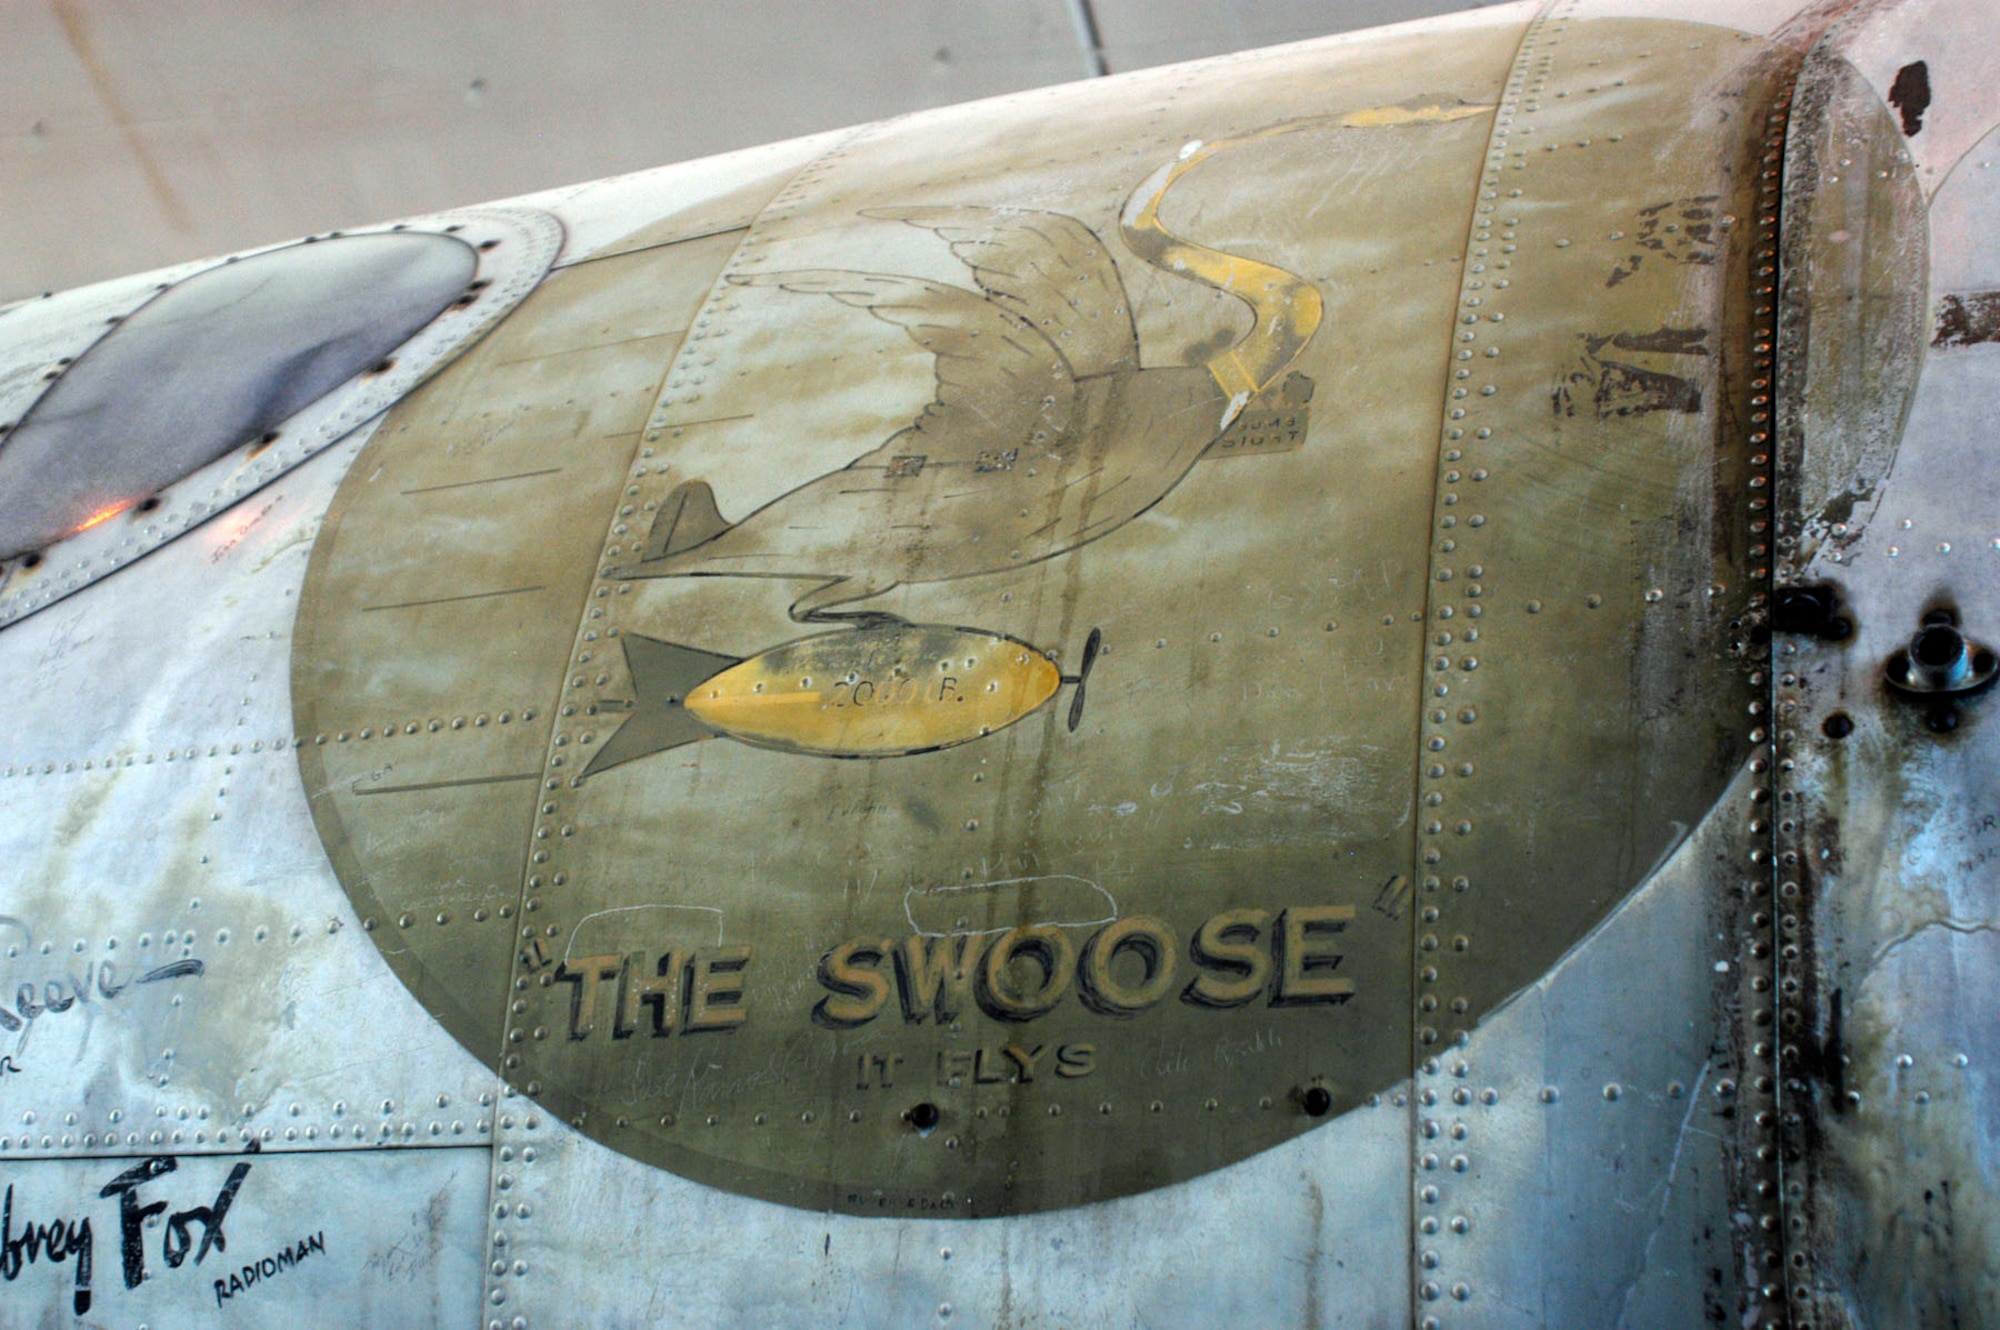 DAYTON, Ohio -- Artwork depicting "The Swoose" on the B-17D aircraft. (U.S. Air Force photo)